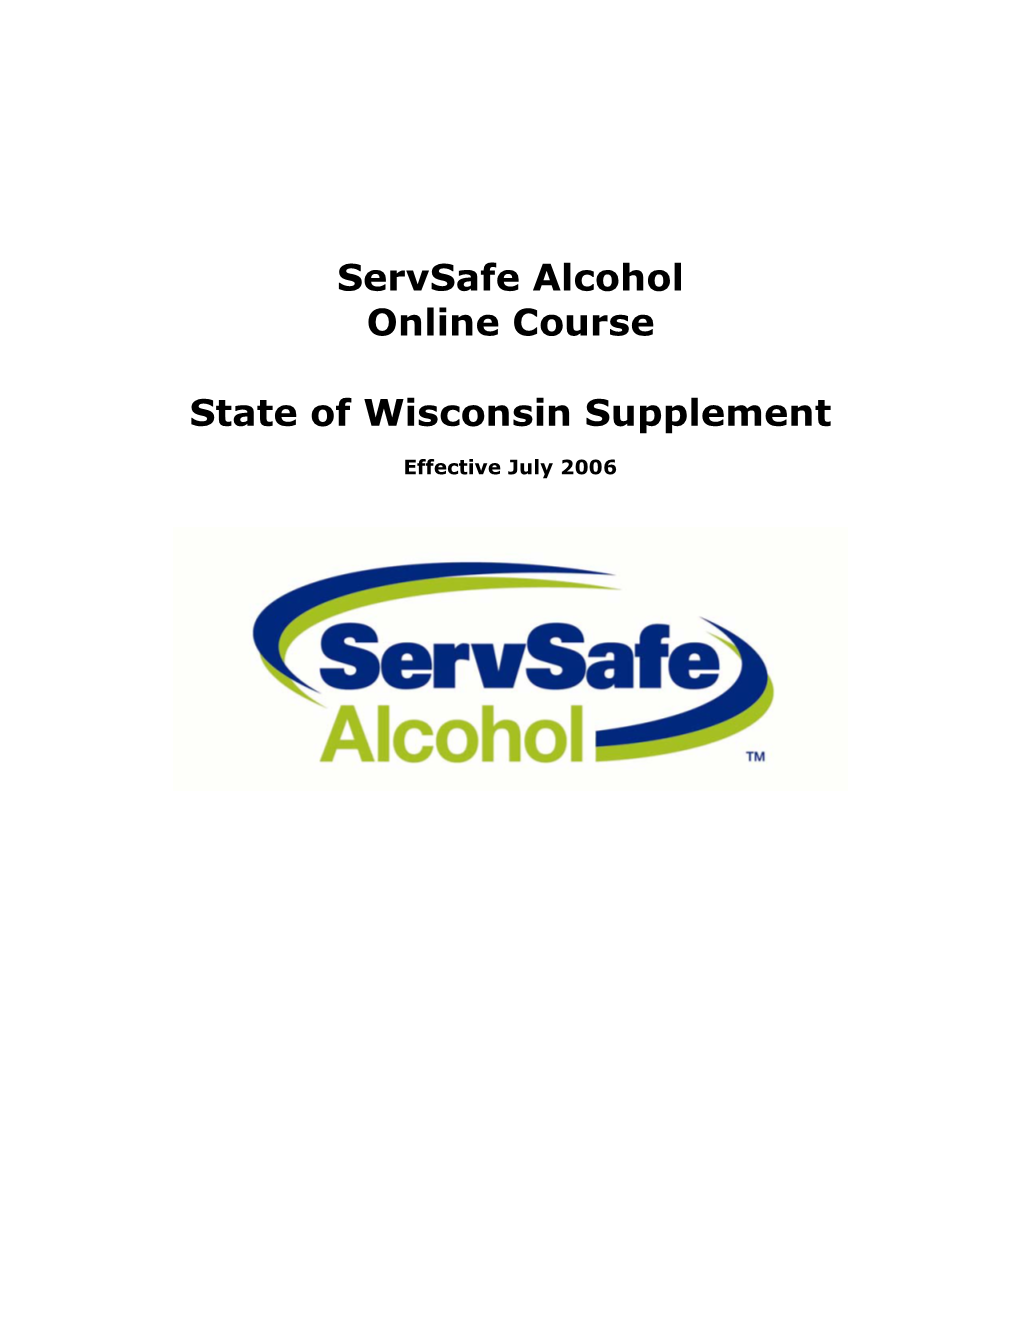 Servsafe Alcohol Online Course State of Wisconsin Supplement